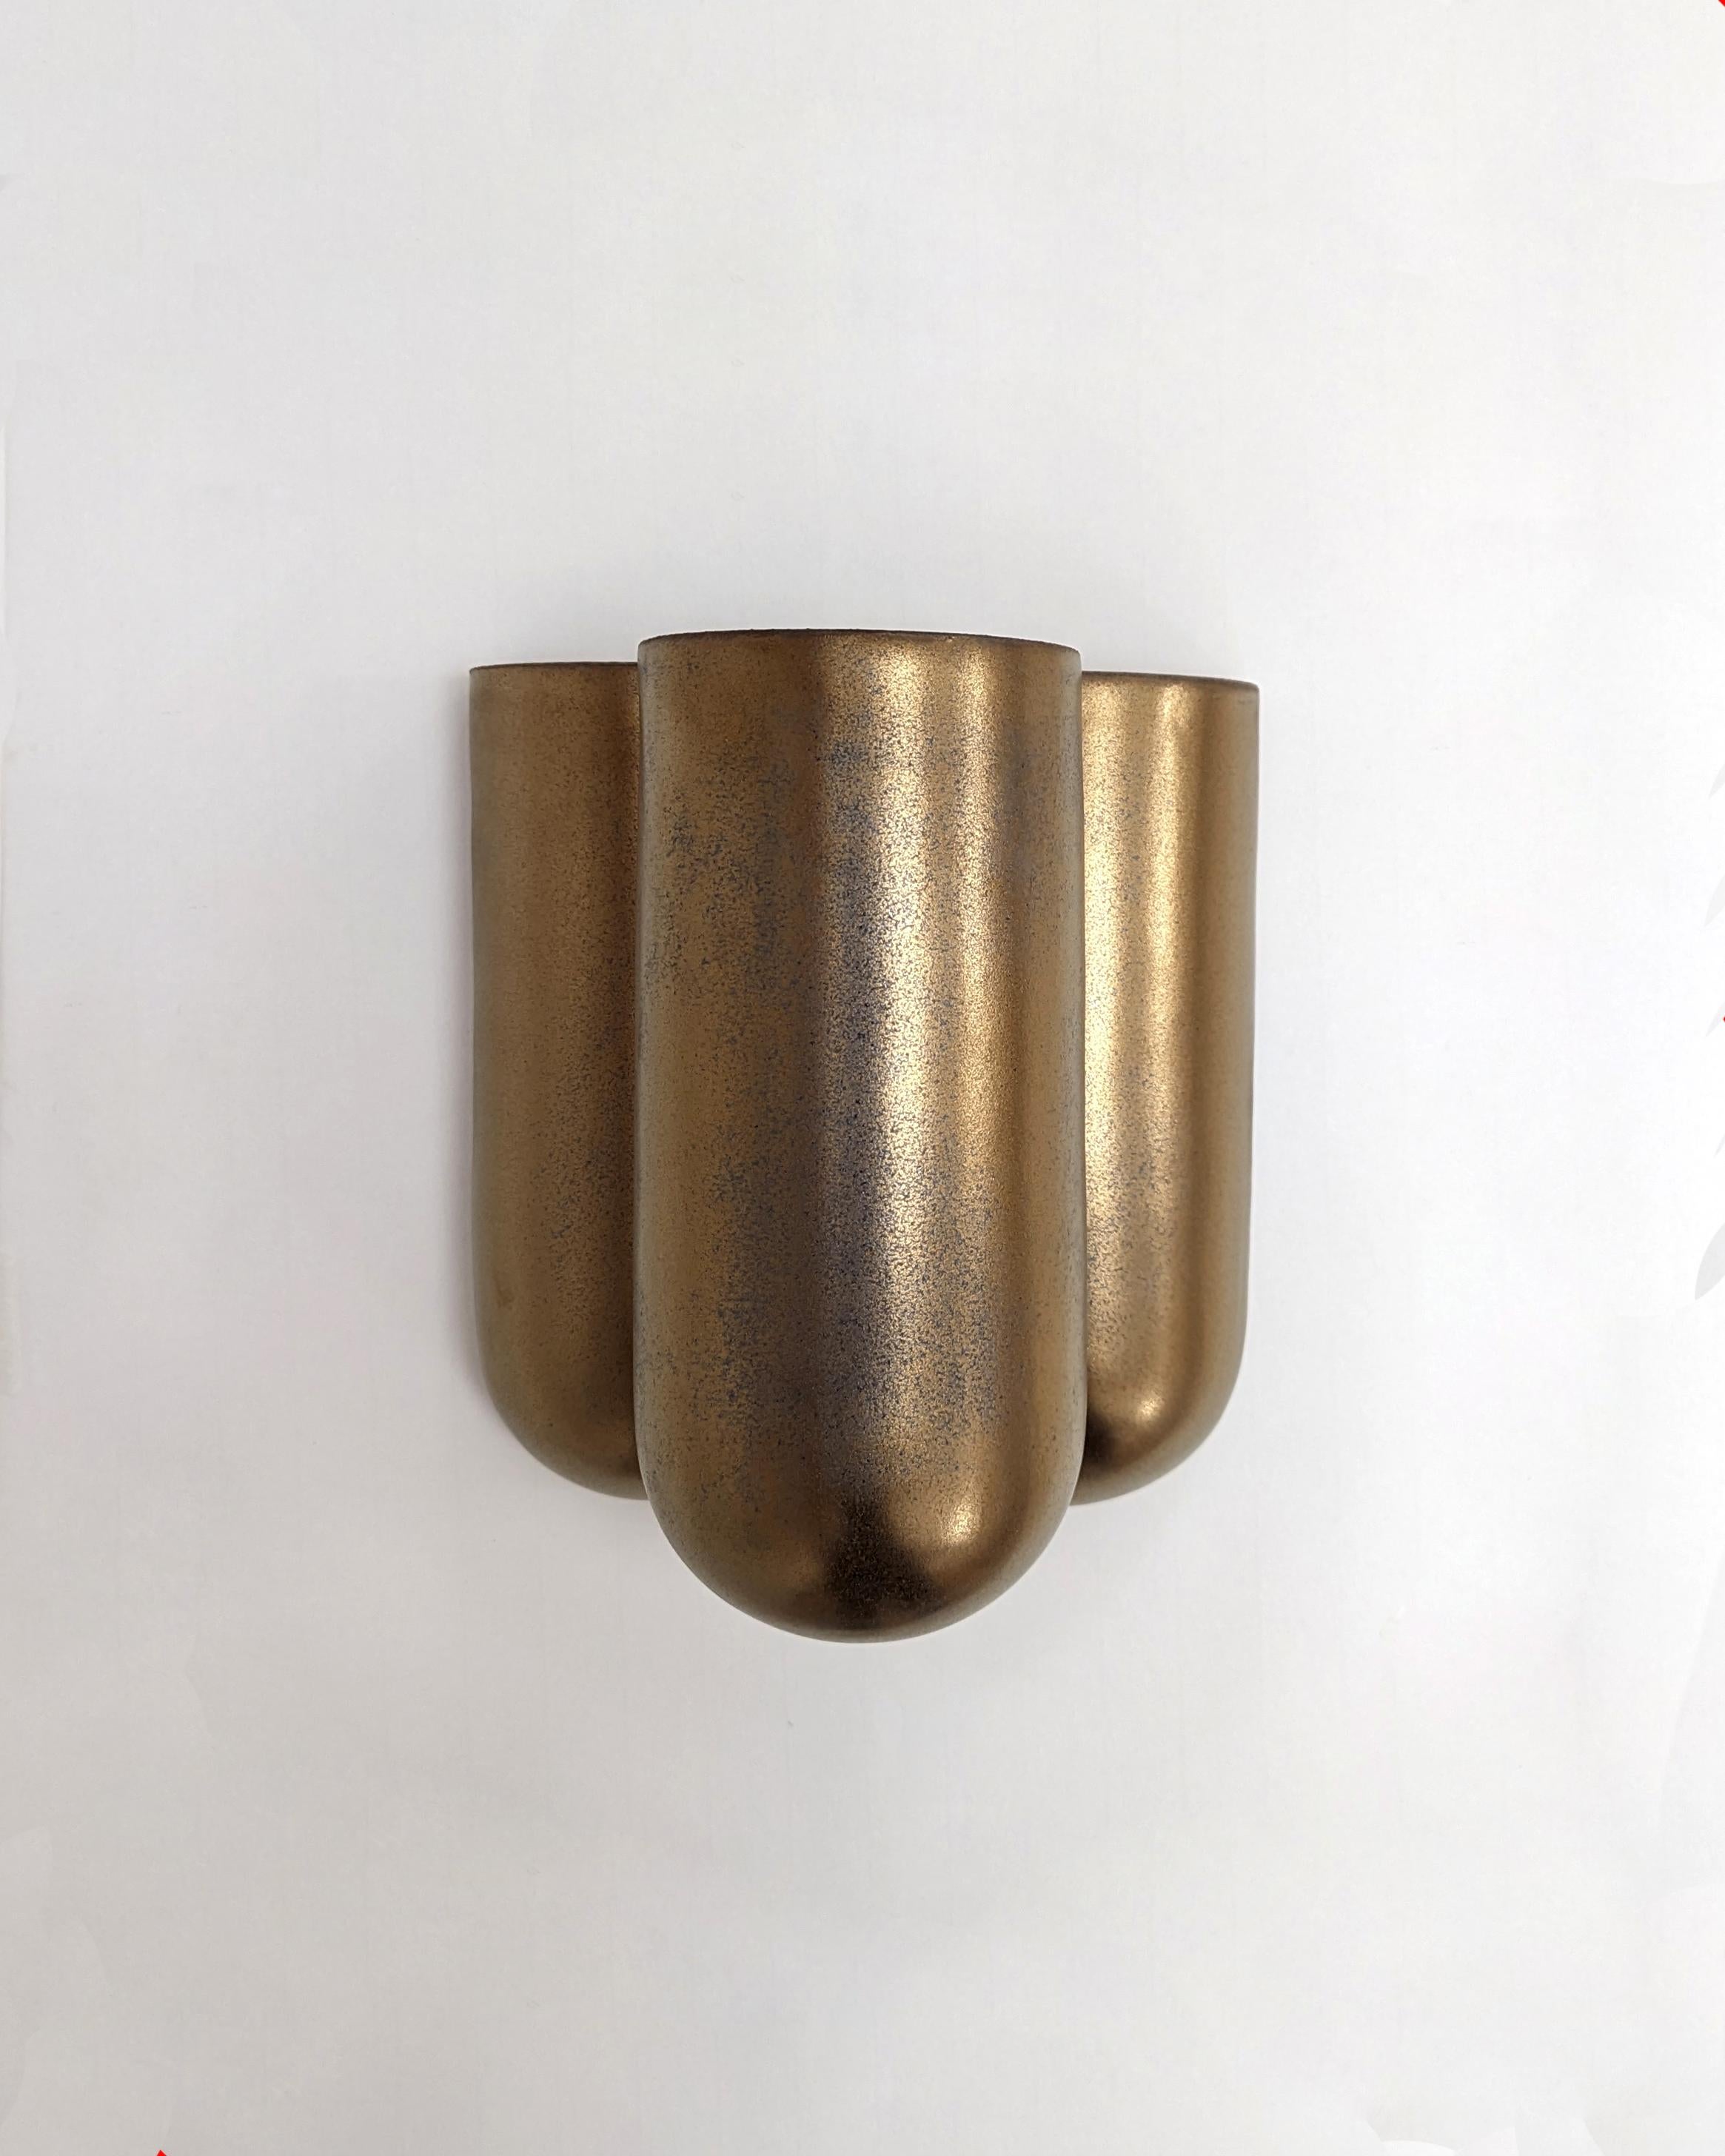 Clay Wall Light by Lisa Allegra 2